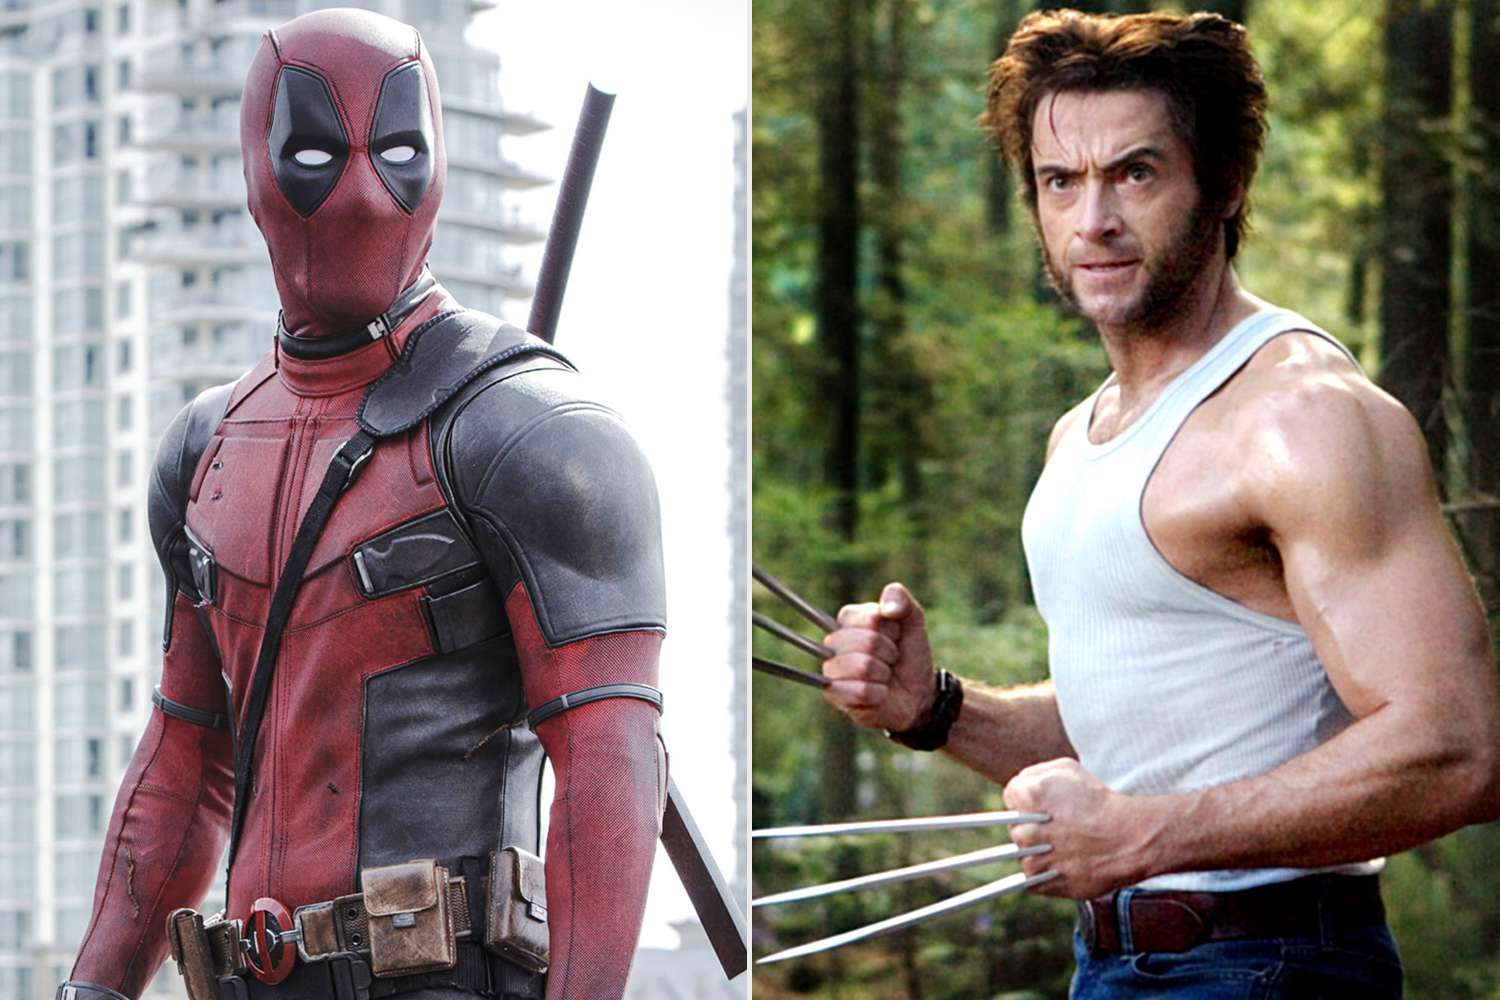 First Teaser Revealed for “Deadpool & Wolverine,” Promising Action and Time-Travel Shenanigans